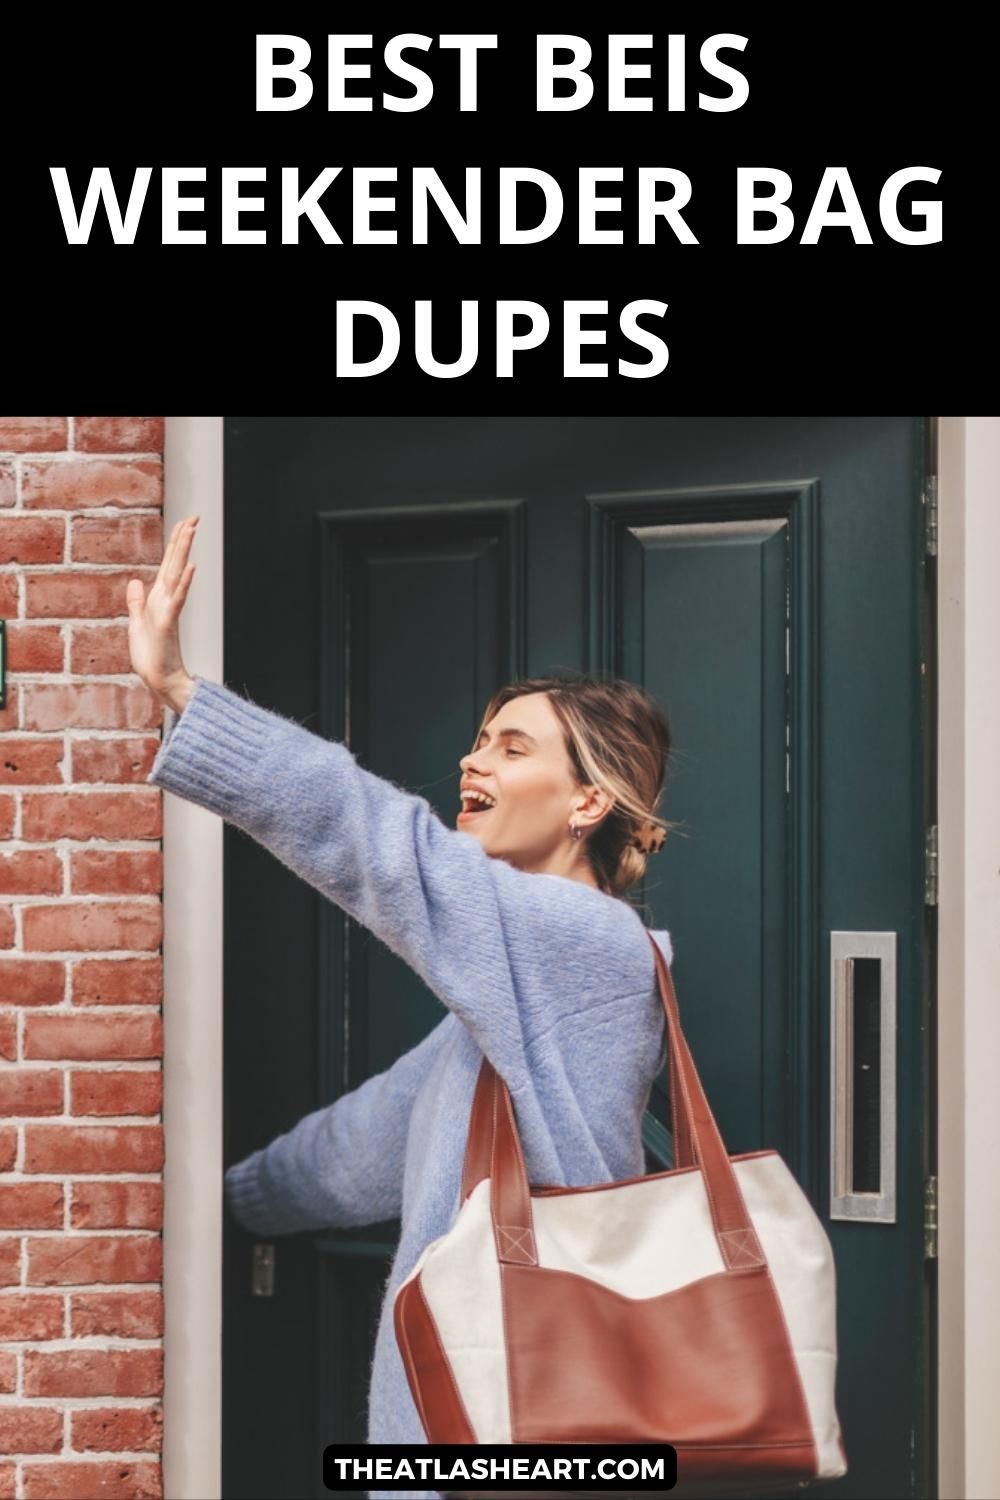 A woman in a light blue sweater and carrying a large two-tone shoulder bag waves cheerfully as she steps through a doorway with the text overlay, "Best Beis Weekender Bag Dupes."